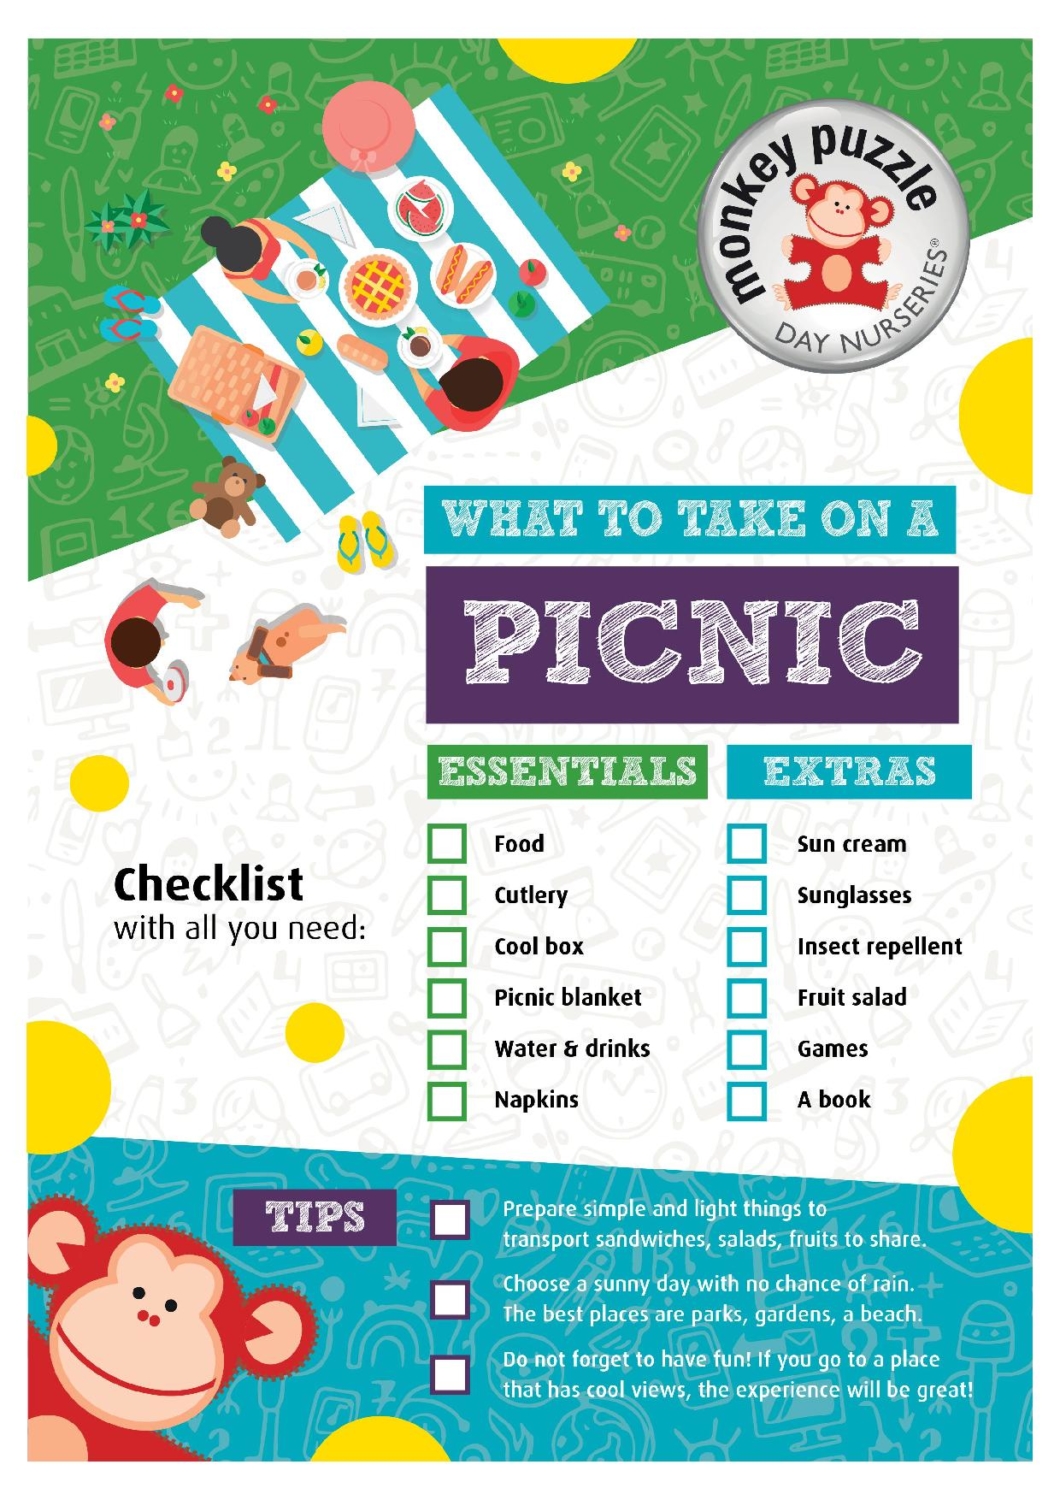 What to take on a picnic checklist